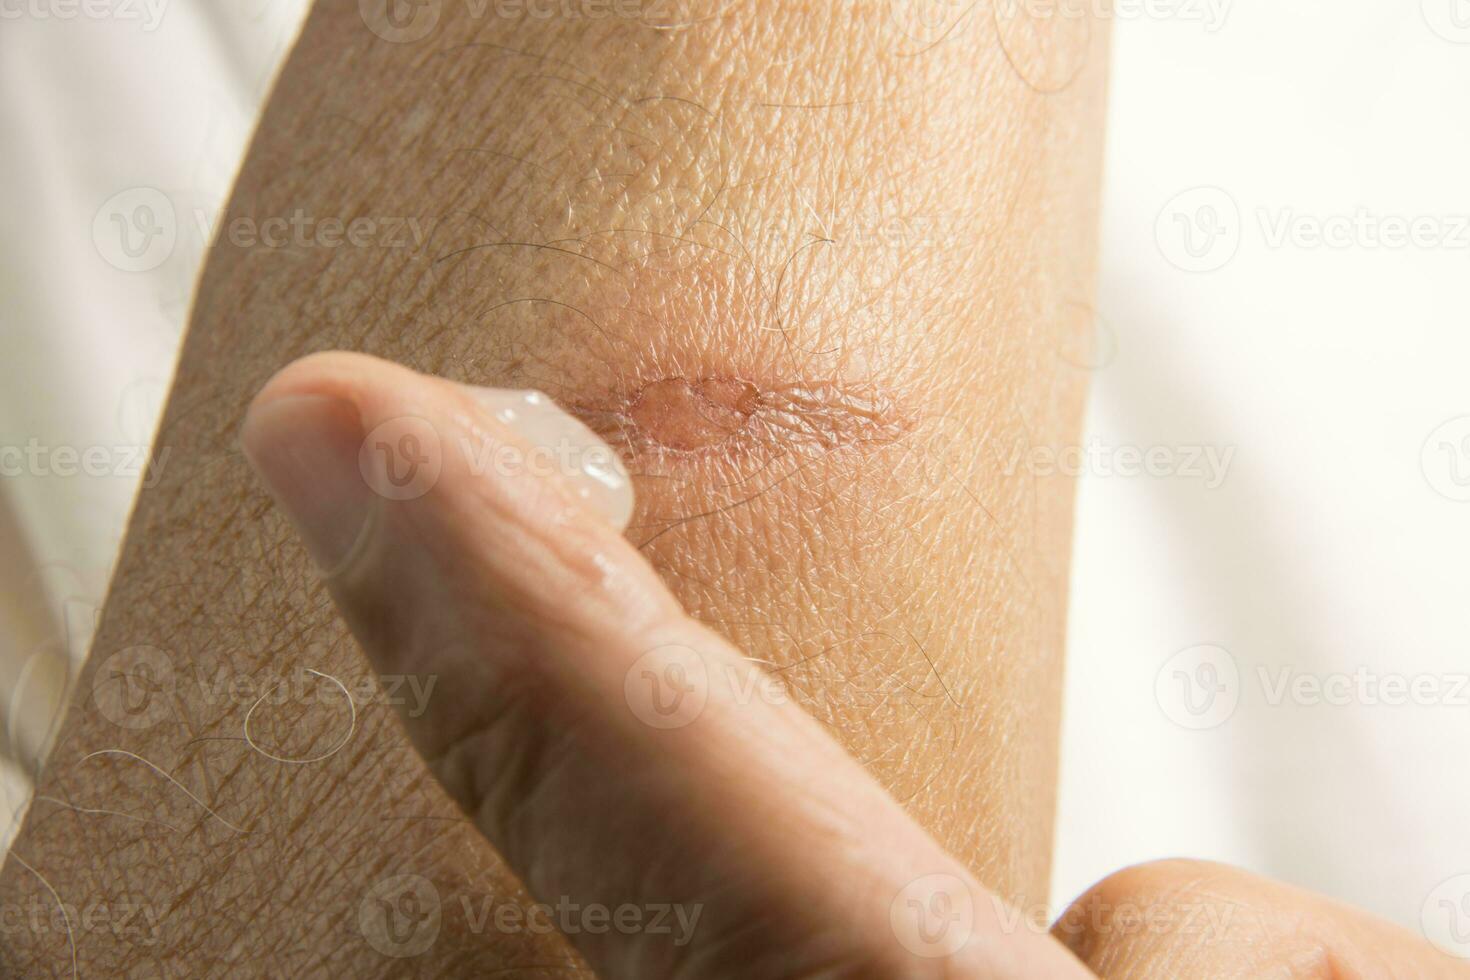 Man applying ointment to a small minor first degree burn on his forearm photo